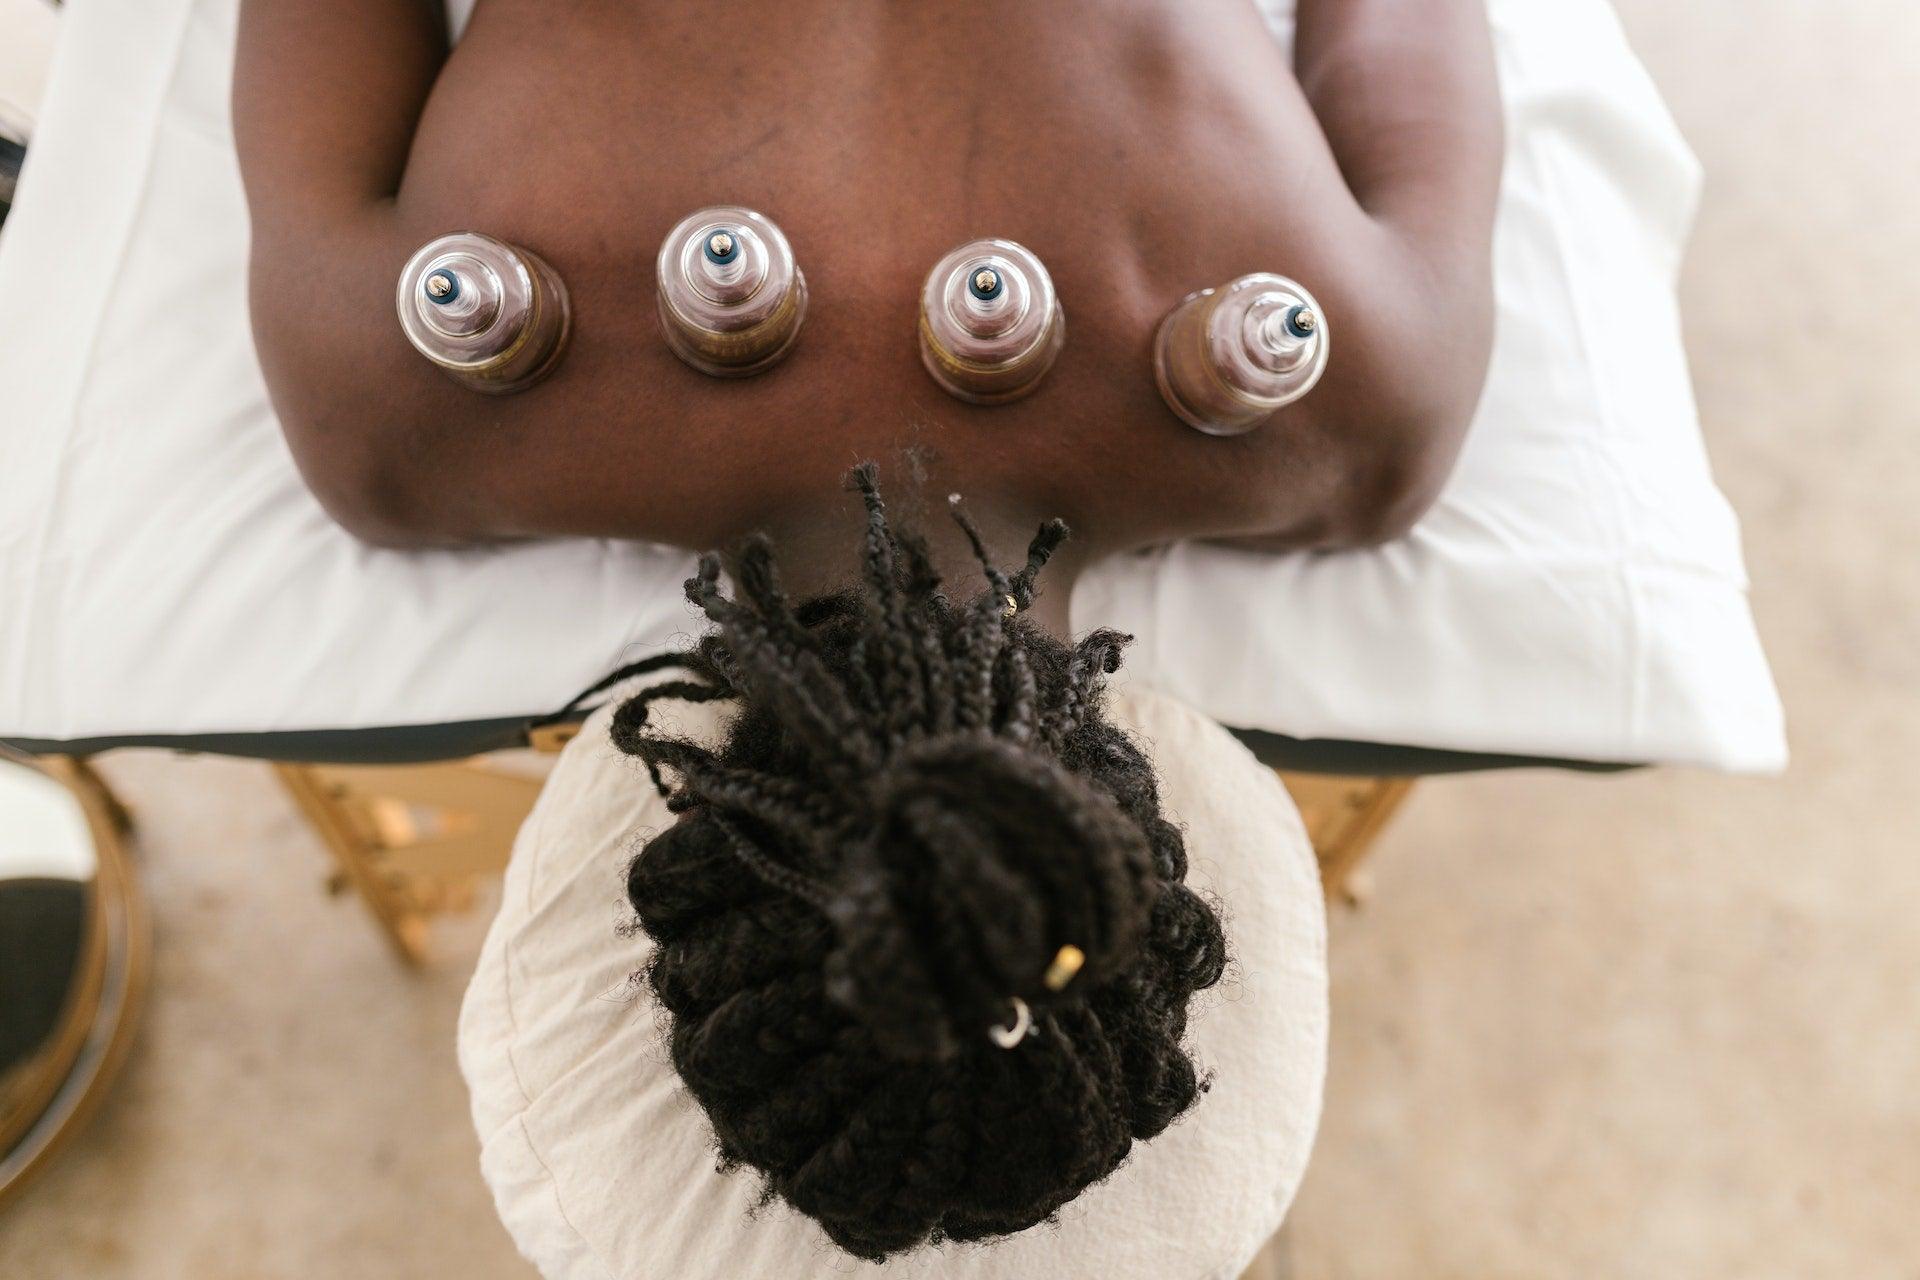 Combined Benefits From Cupping, Red Light, And Heat Therapy - Revomadic